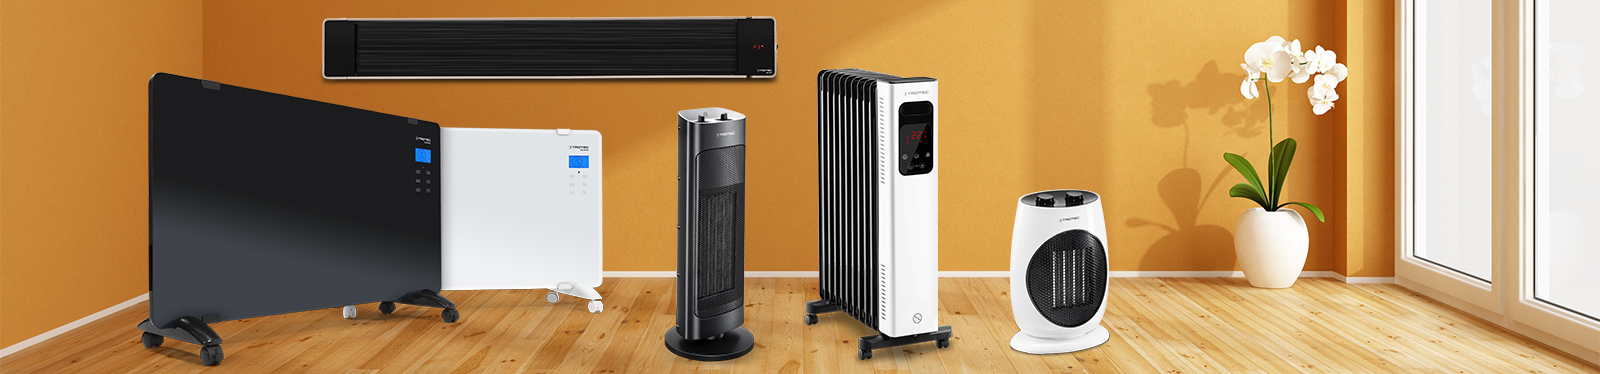 Electric heaters from Trotec